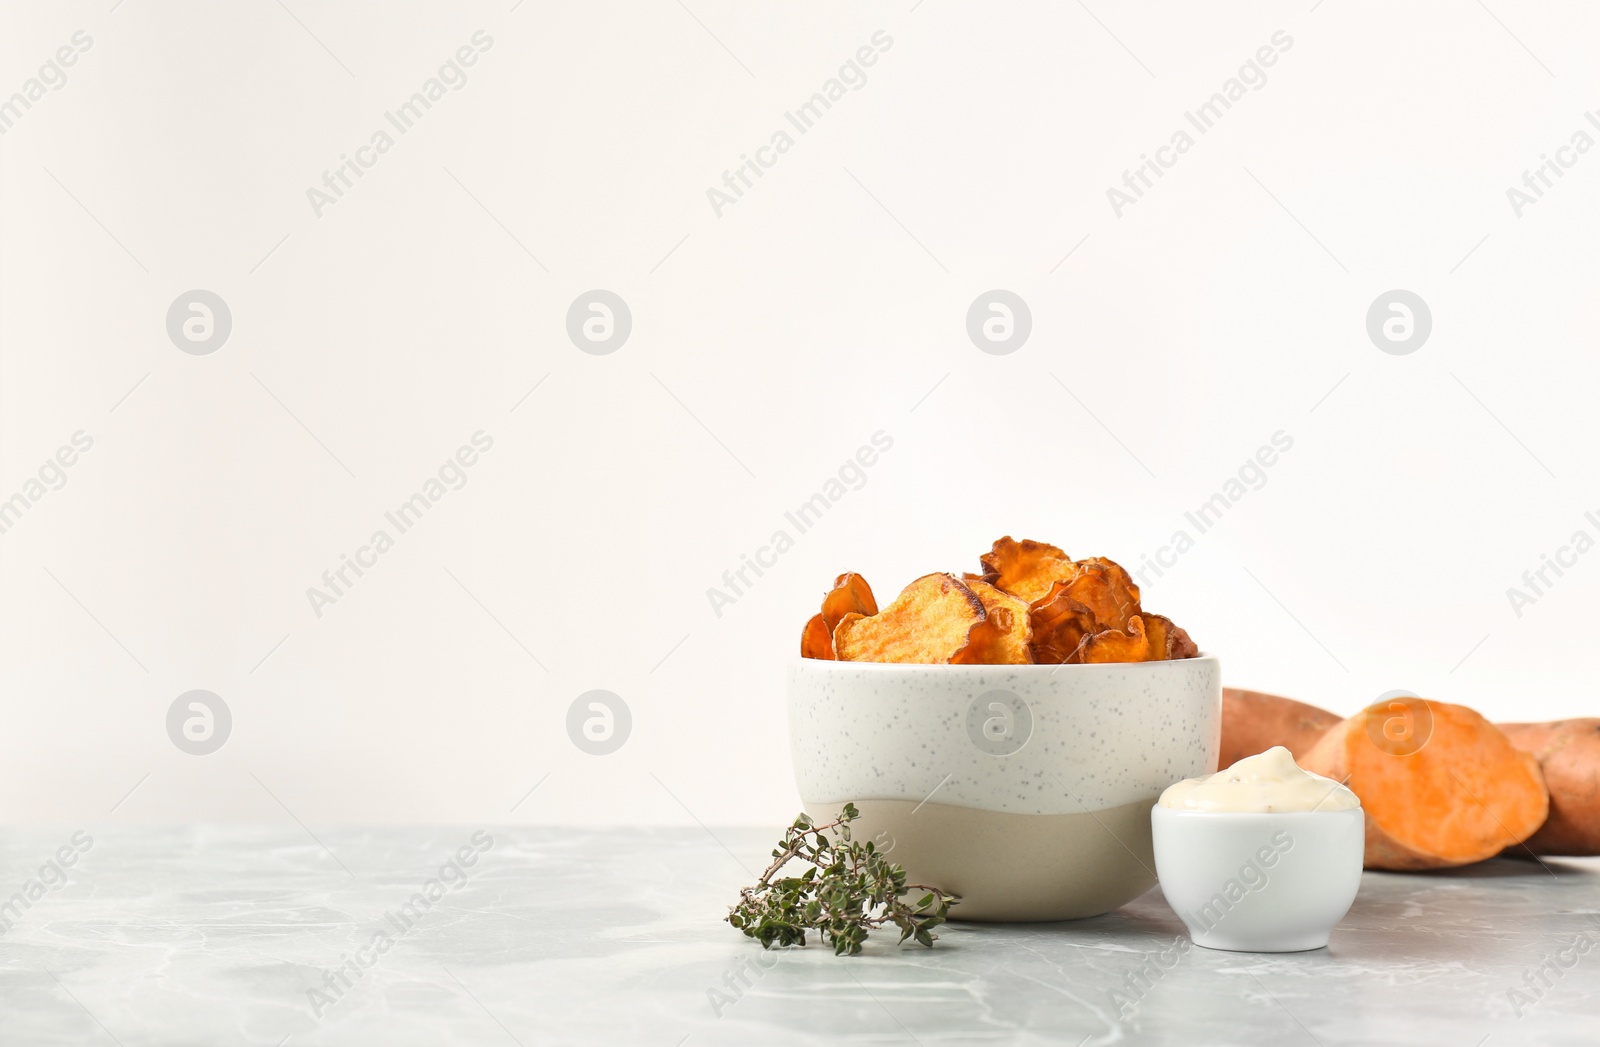 Photo of Bowl of sweet potato chips with sauce and herbs on table against white background. Space for text